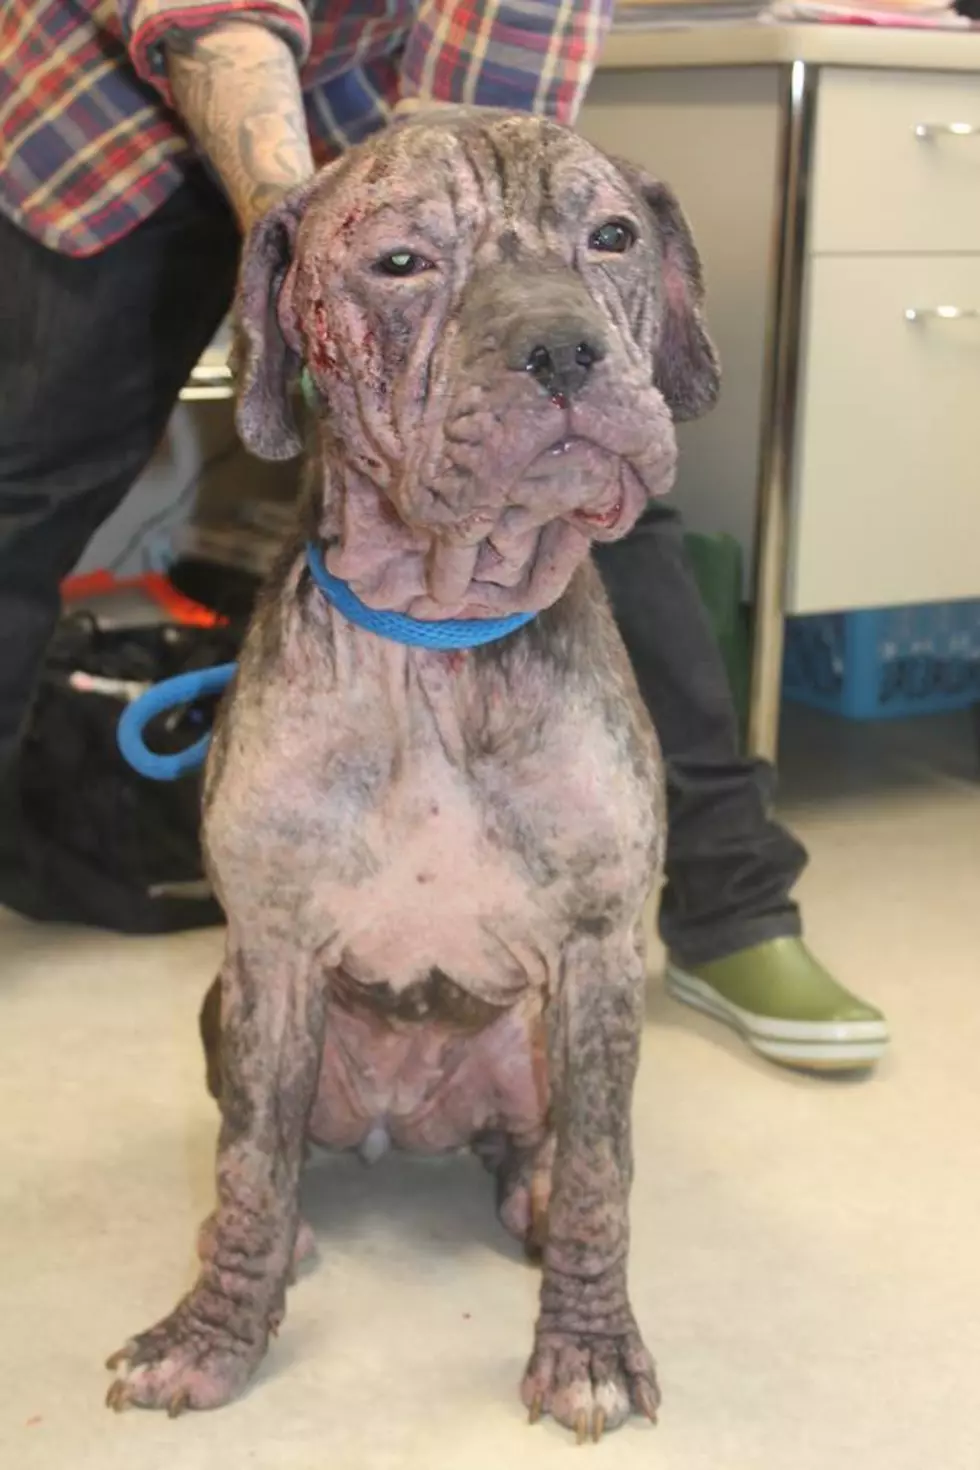 Help Needed After Dog Found Abused, Abandoned in Hudson Valley